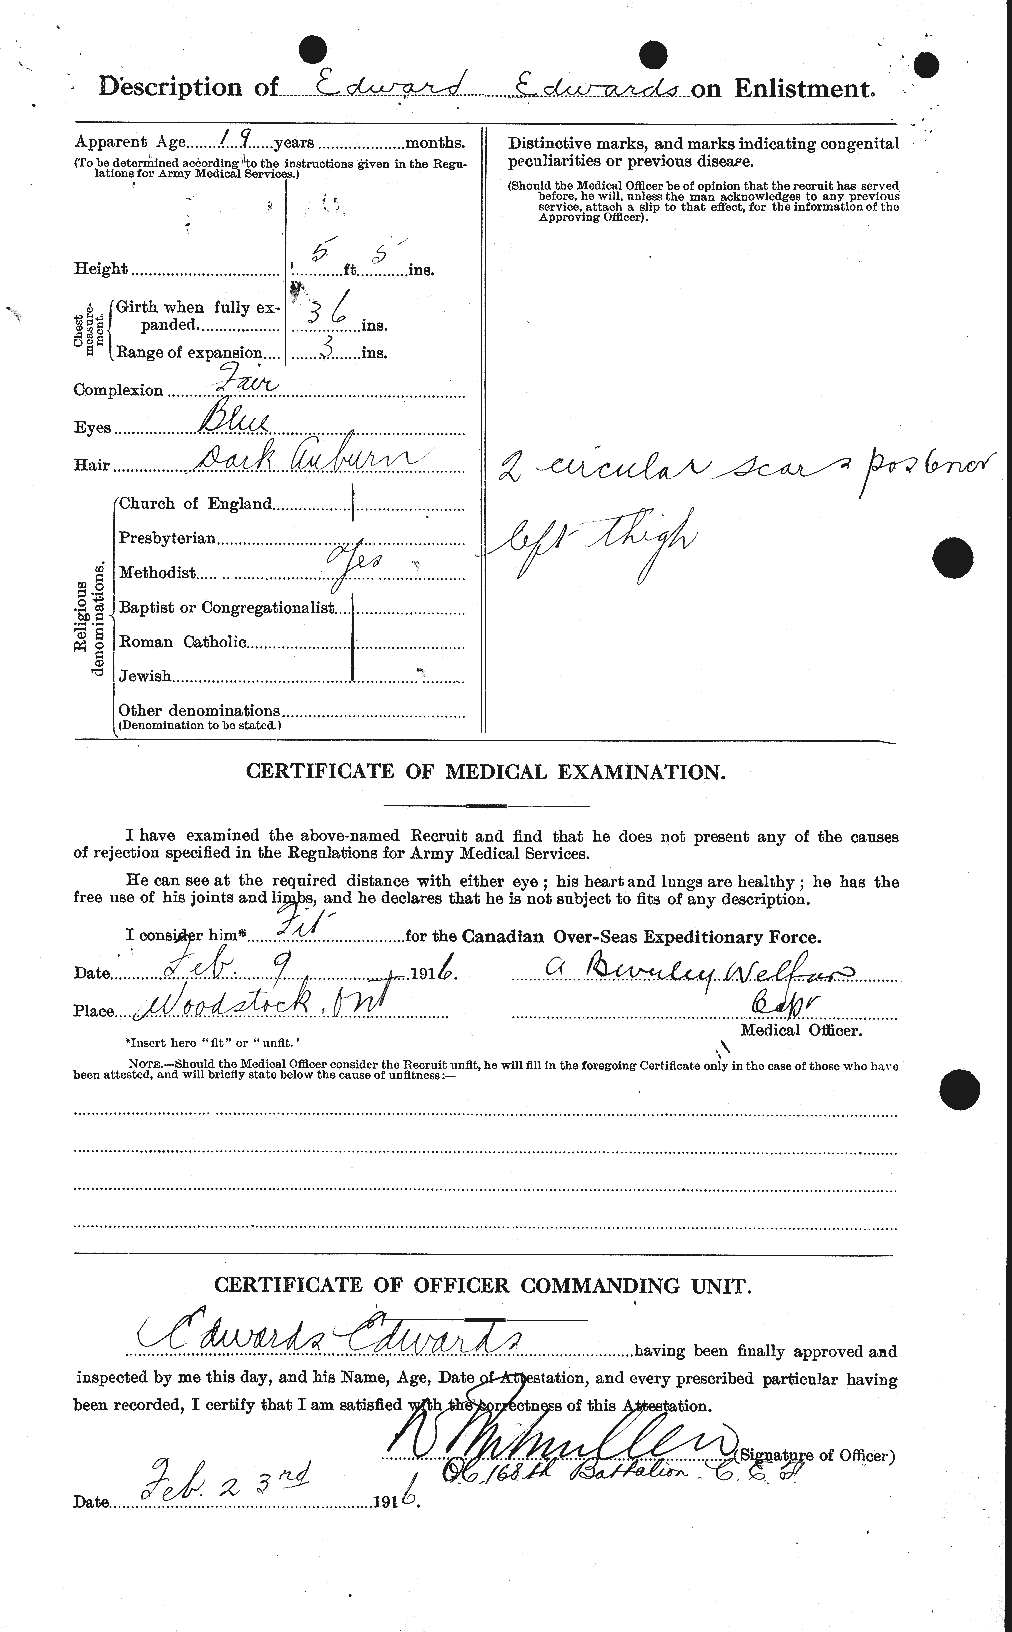 Personnel Records of the First World War - CEF 307894b